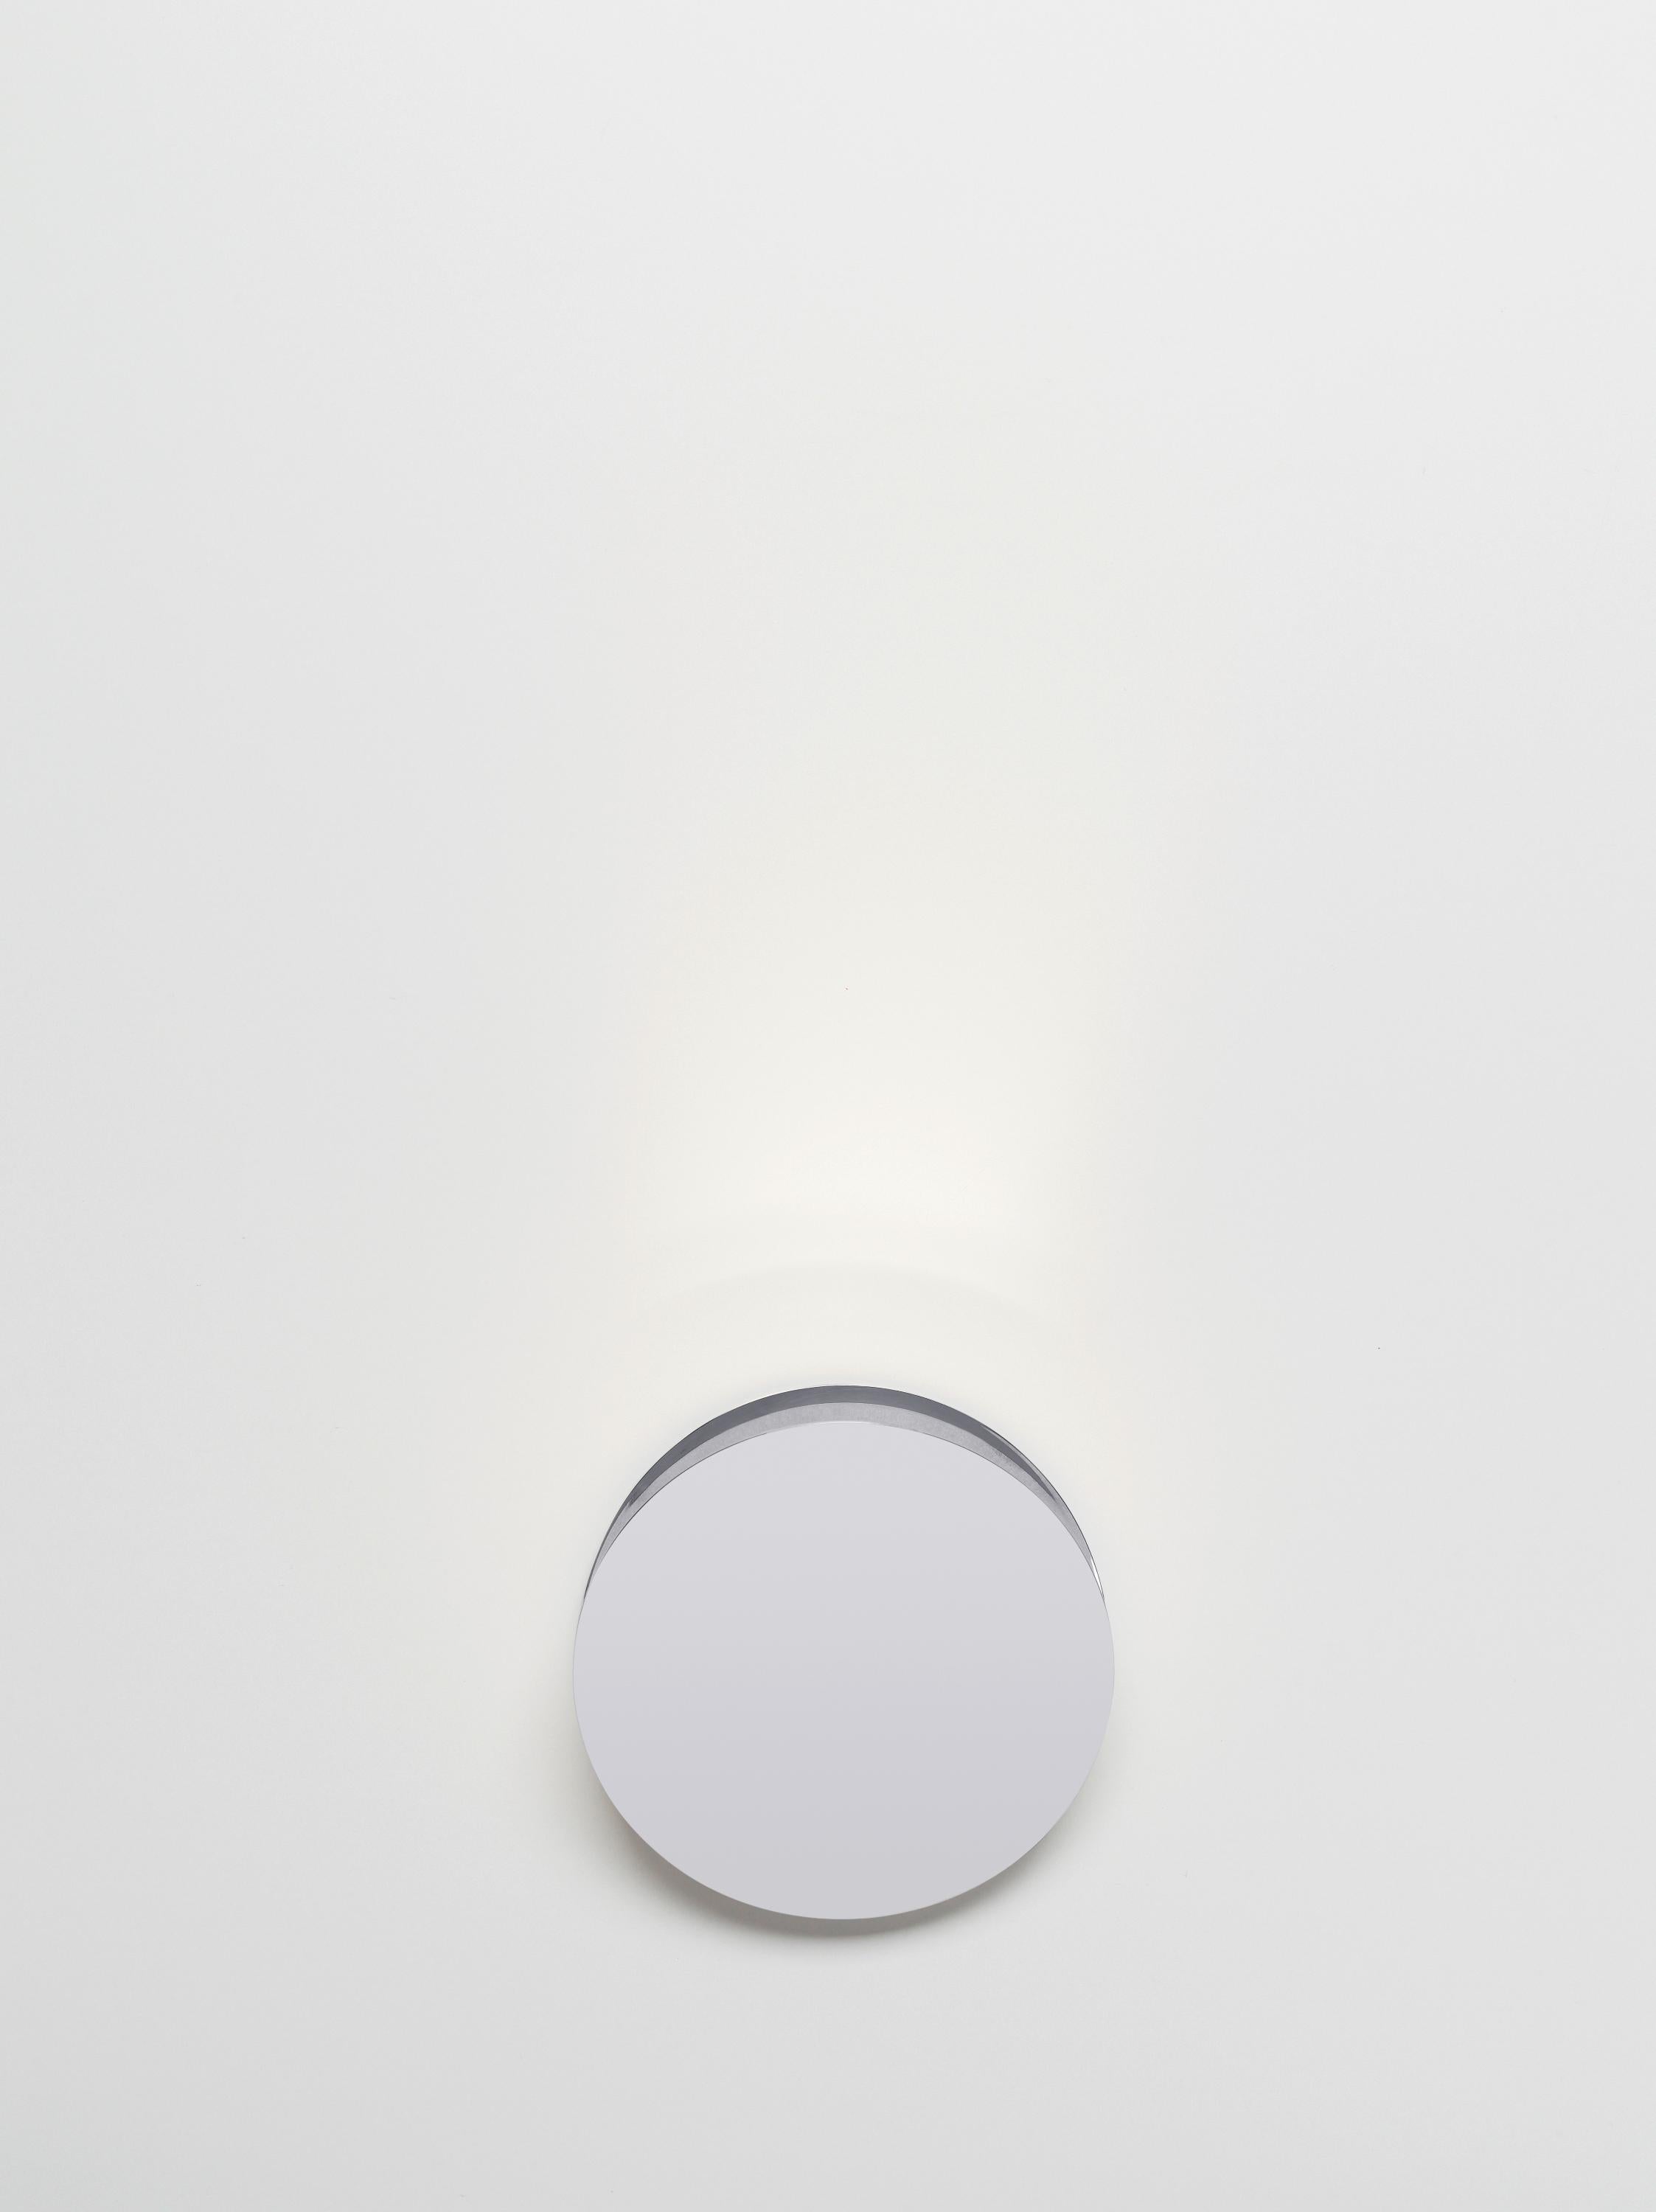 Silver (Nickel-Plated Stainless Steel) e15 North Wall Light by Eva Marguerre and Marcel Besau 2